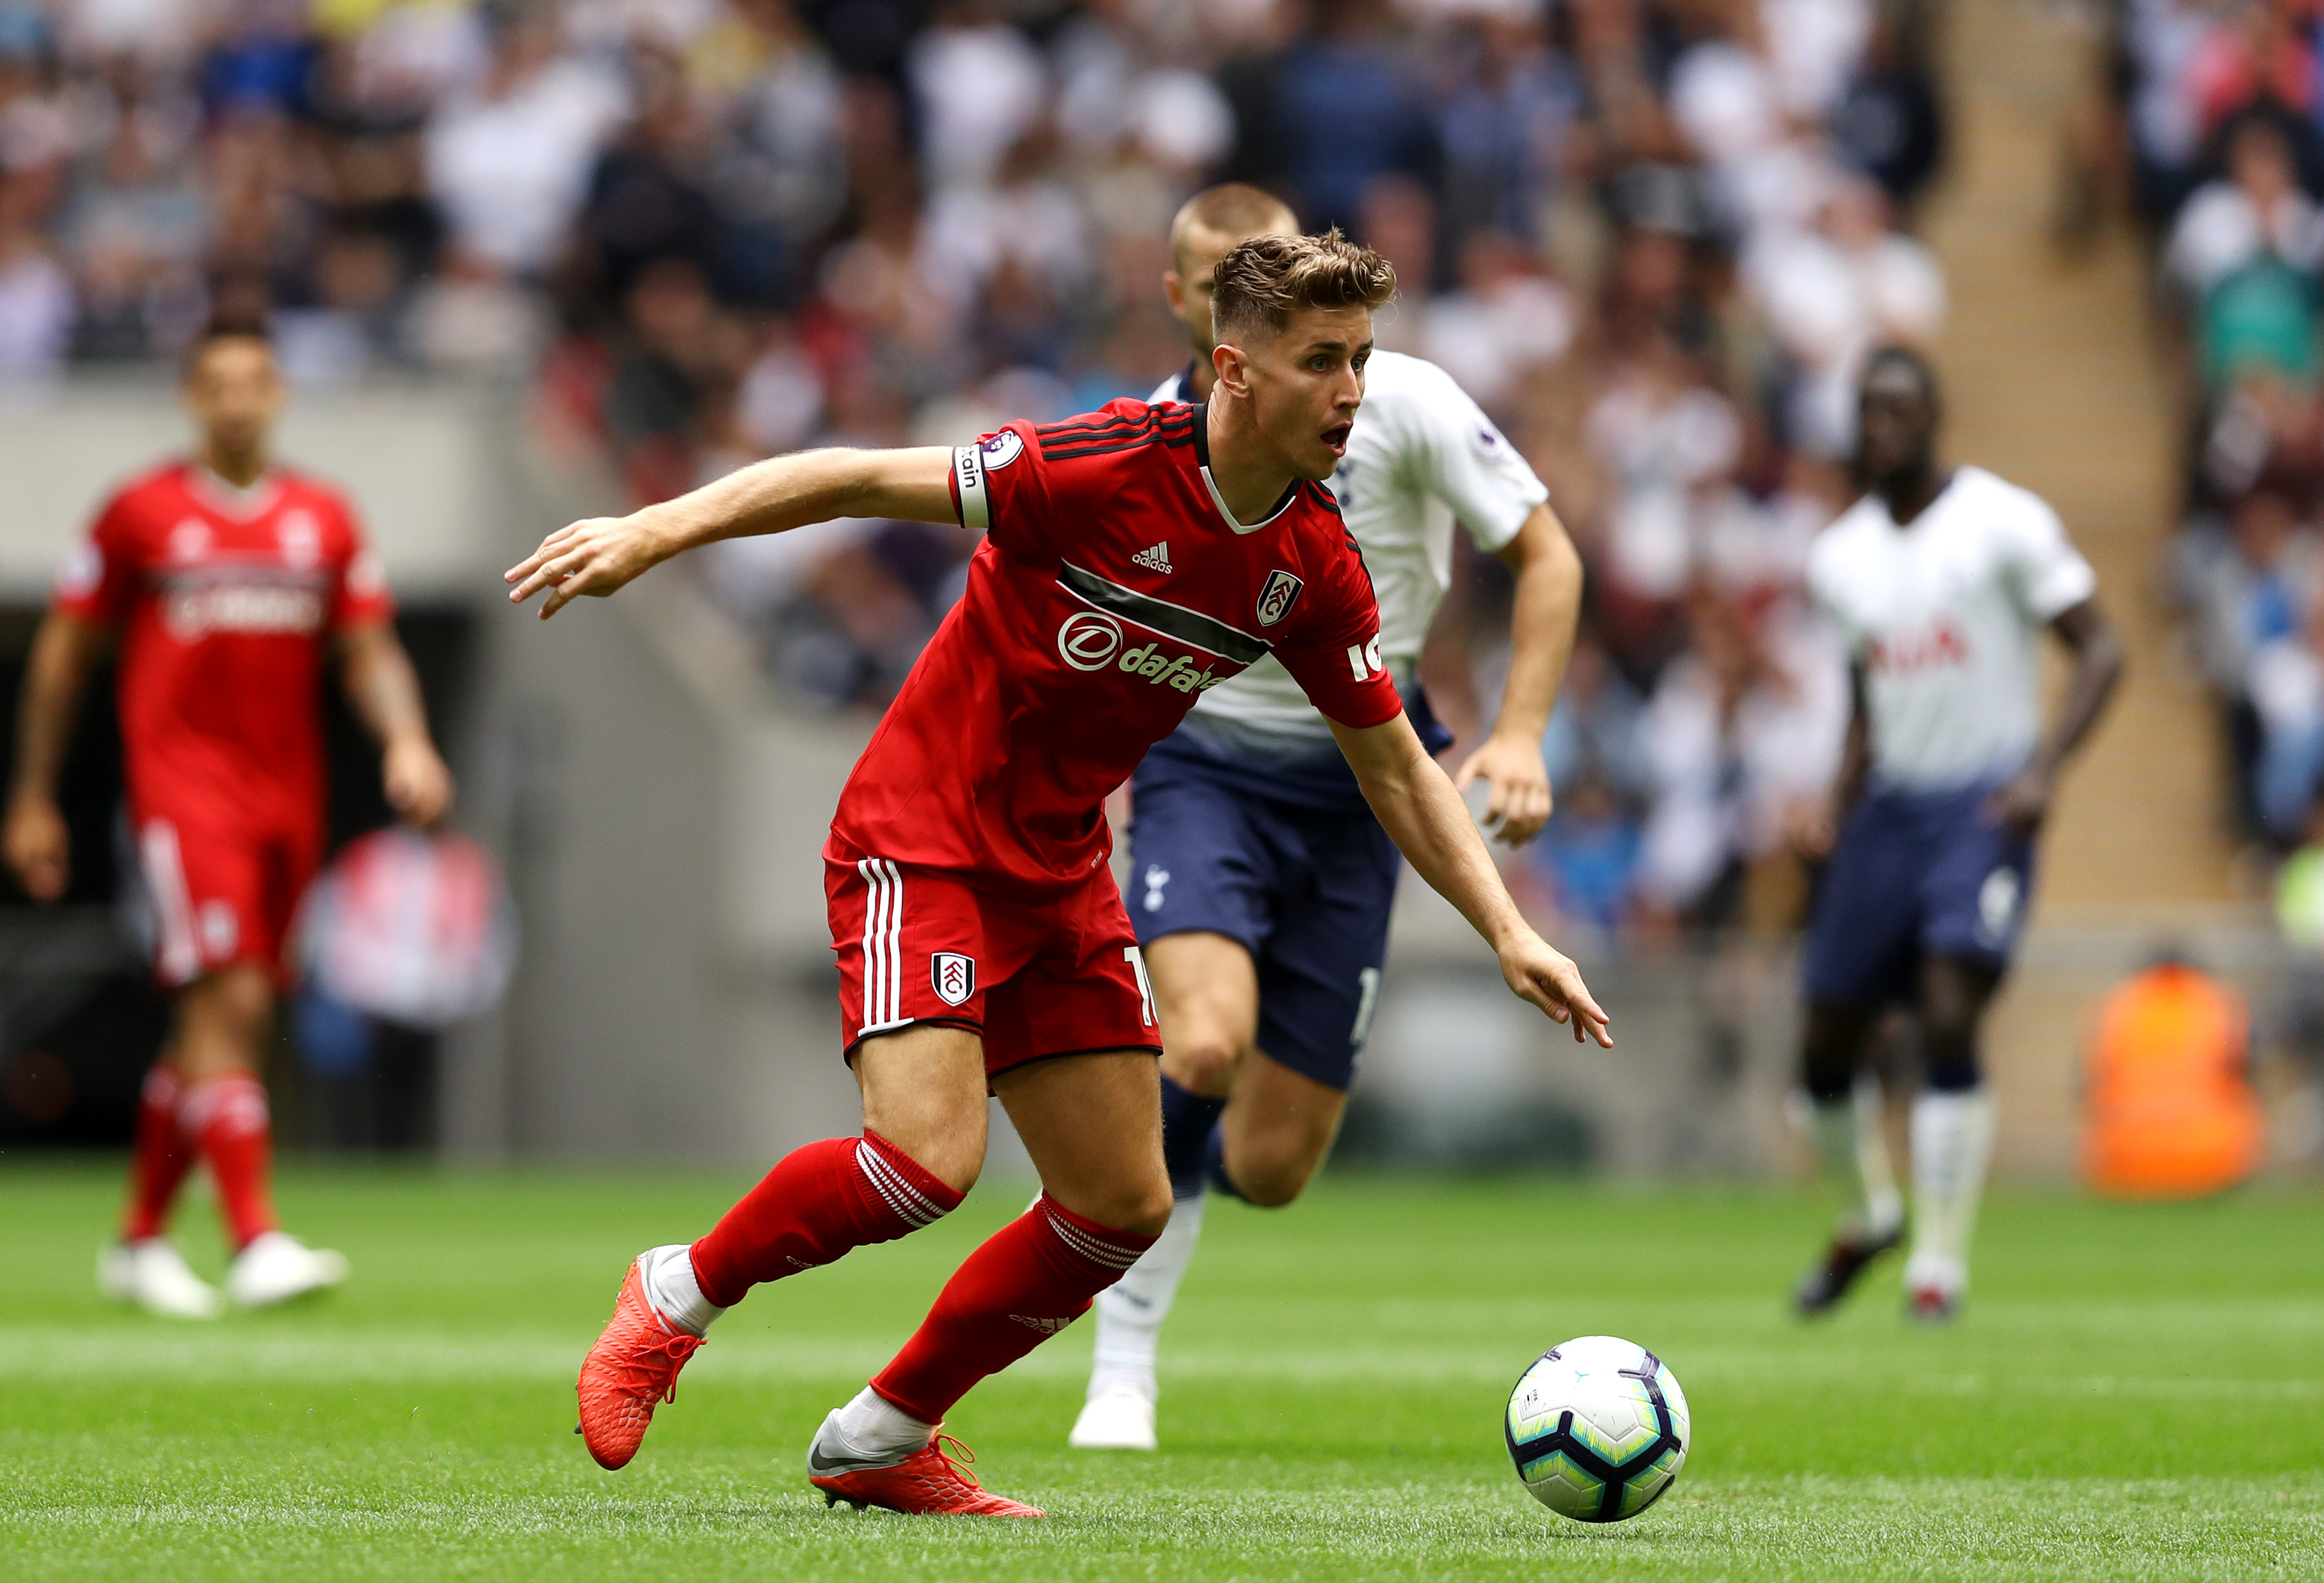 LONDON, ENGLAND - AUGUST 18:  Tom Cairney of Fulham looks to pass the ball during the Premier League match between Tottenham Hotspur and Fulham FC at Wembley Stadium on August 18, 2018 in London, United Kingdom.  (Photo by Dan Istitene/Getty Images)